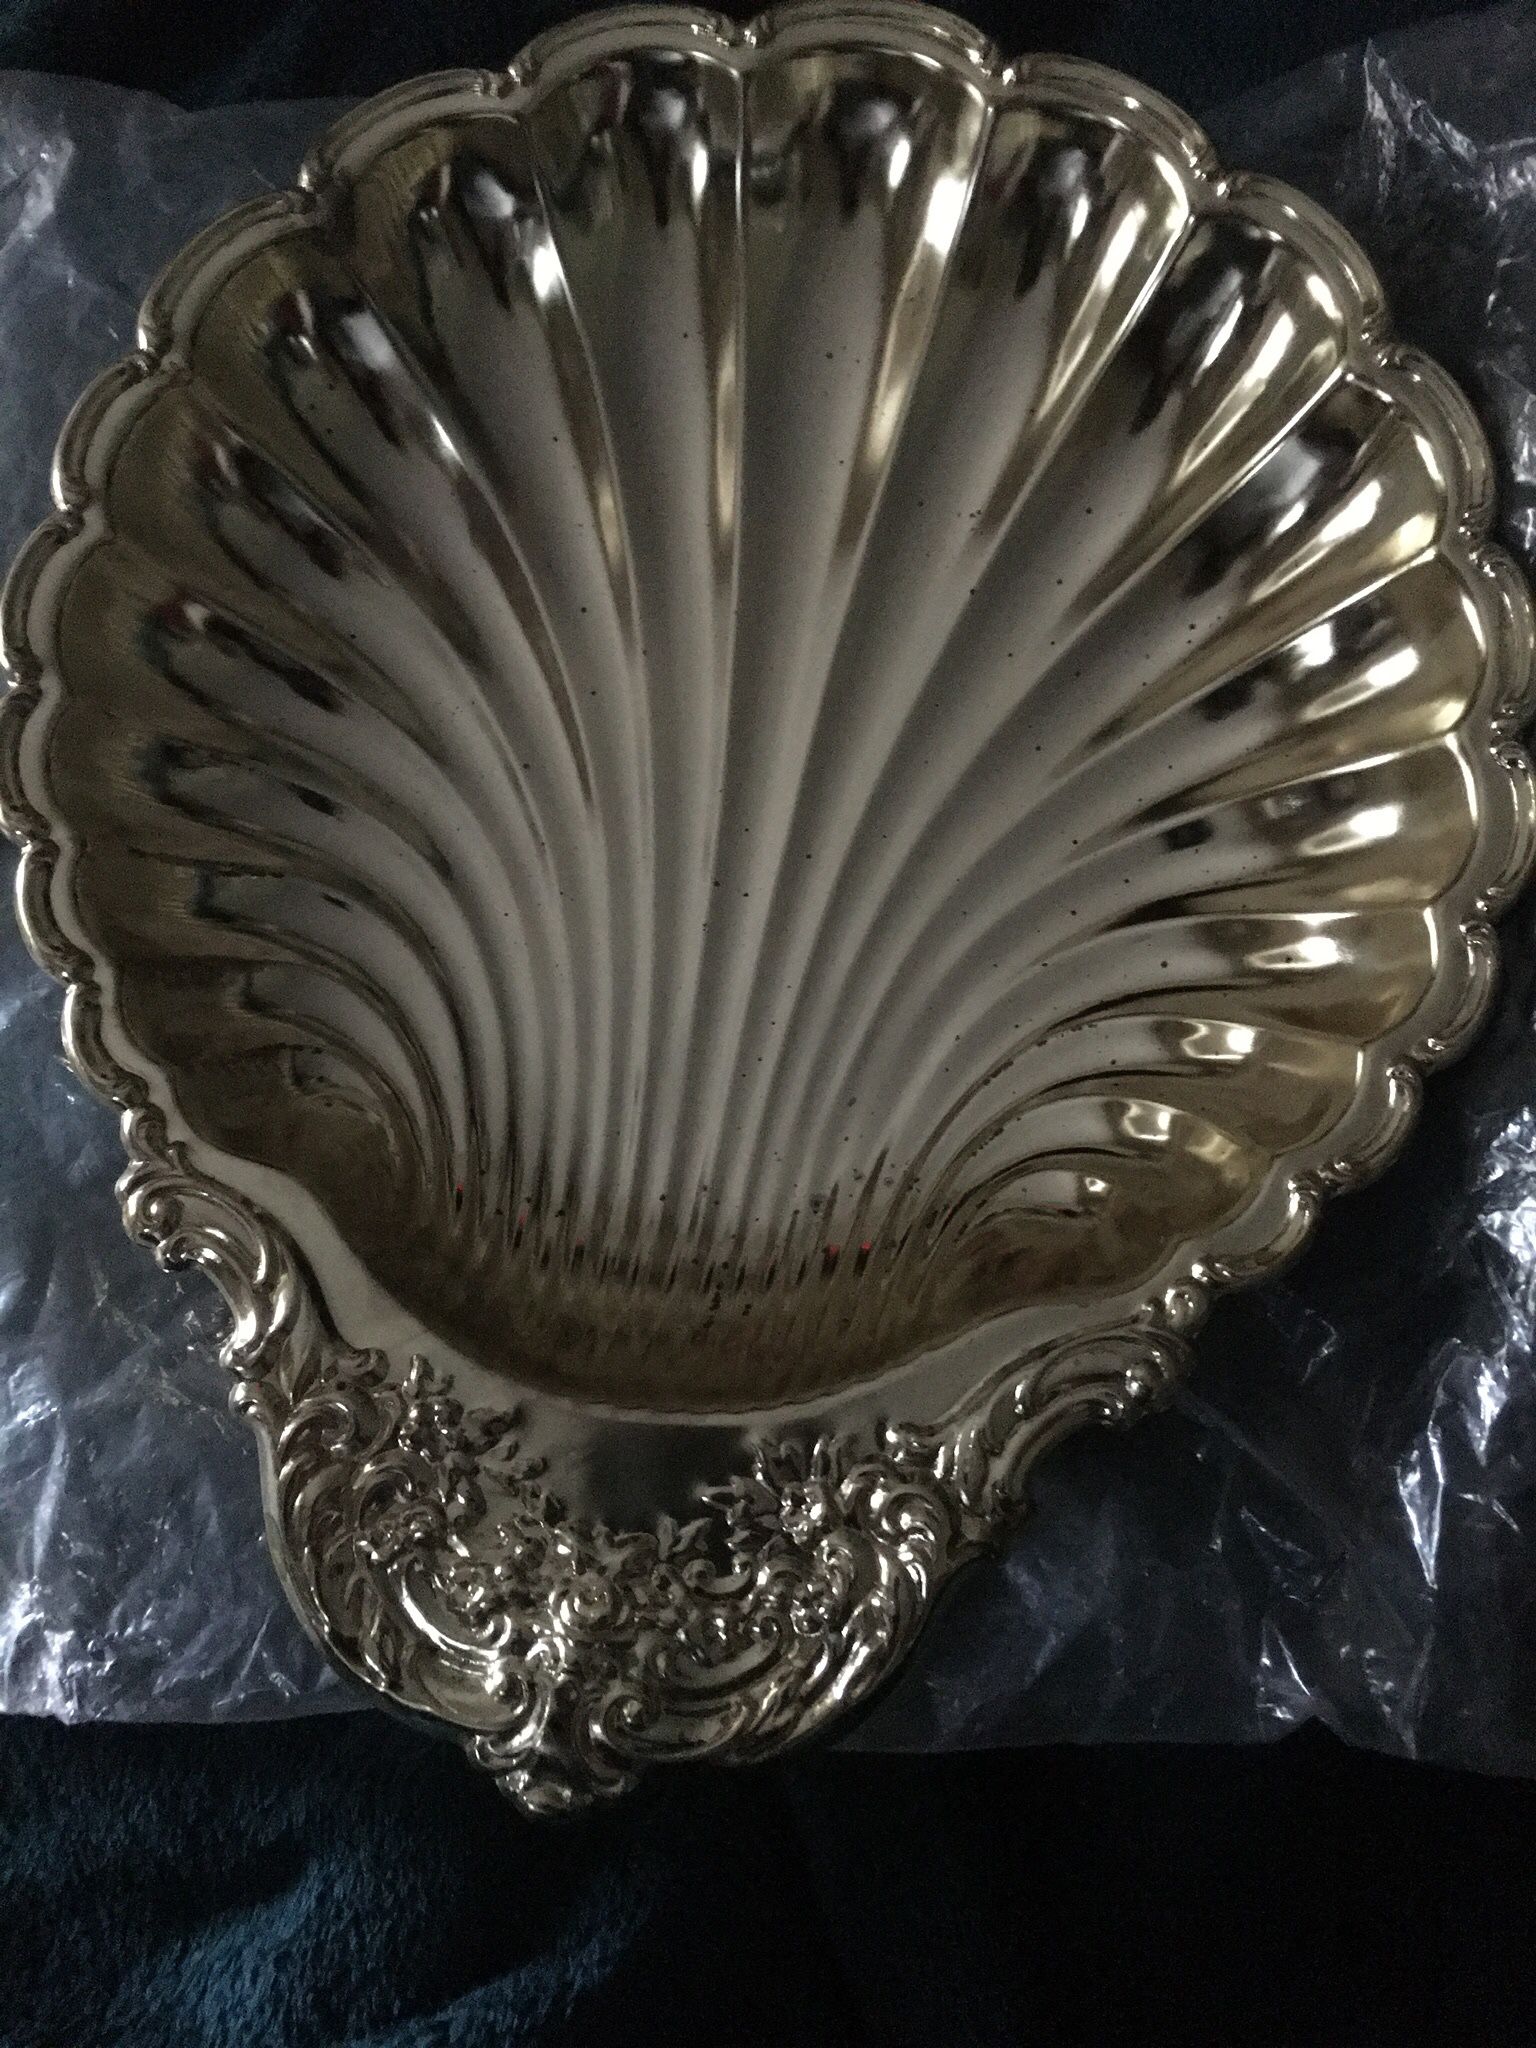 BRAND NEW SILVER PLATED CLAM SHELL BOWL SERVING DISH $20.00